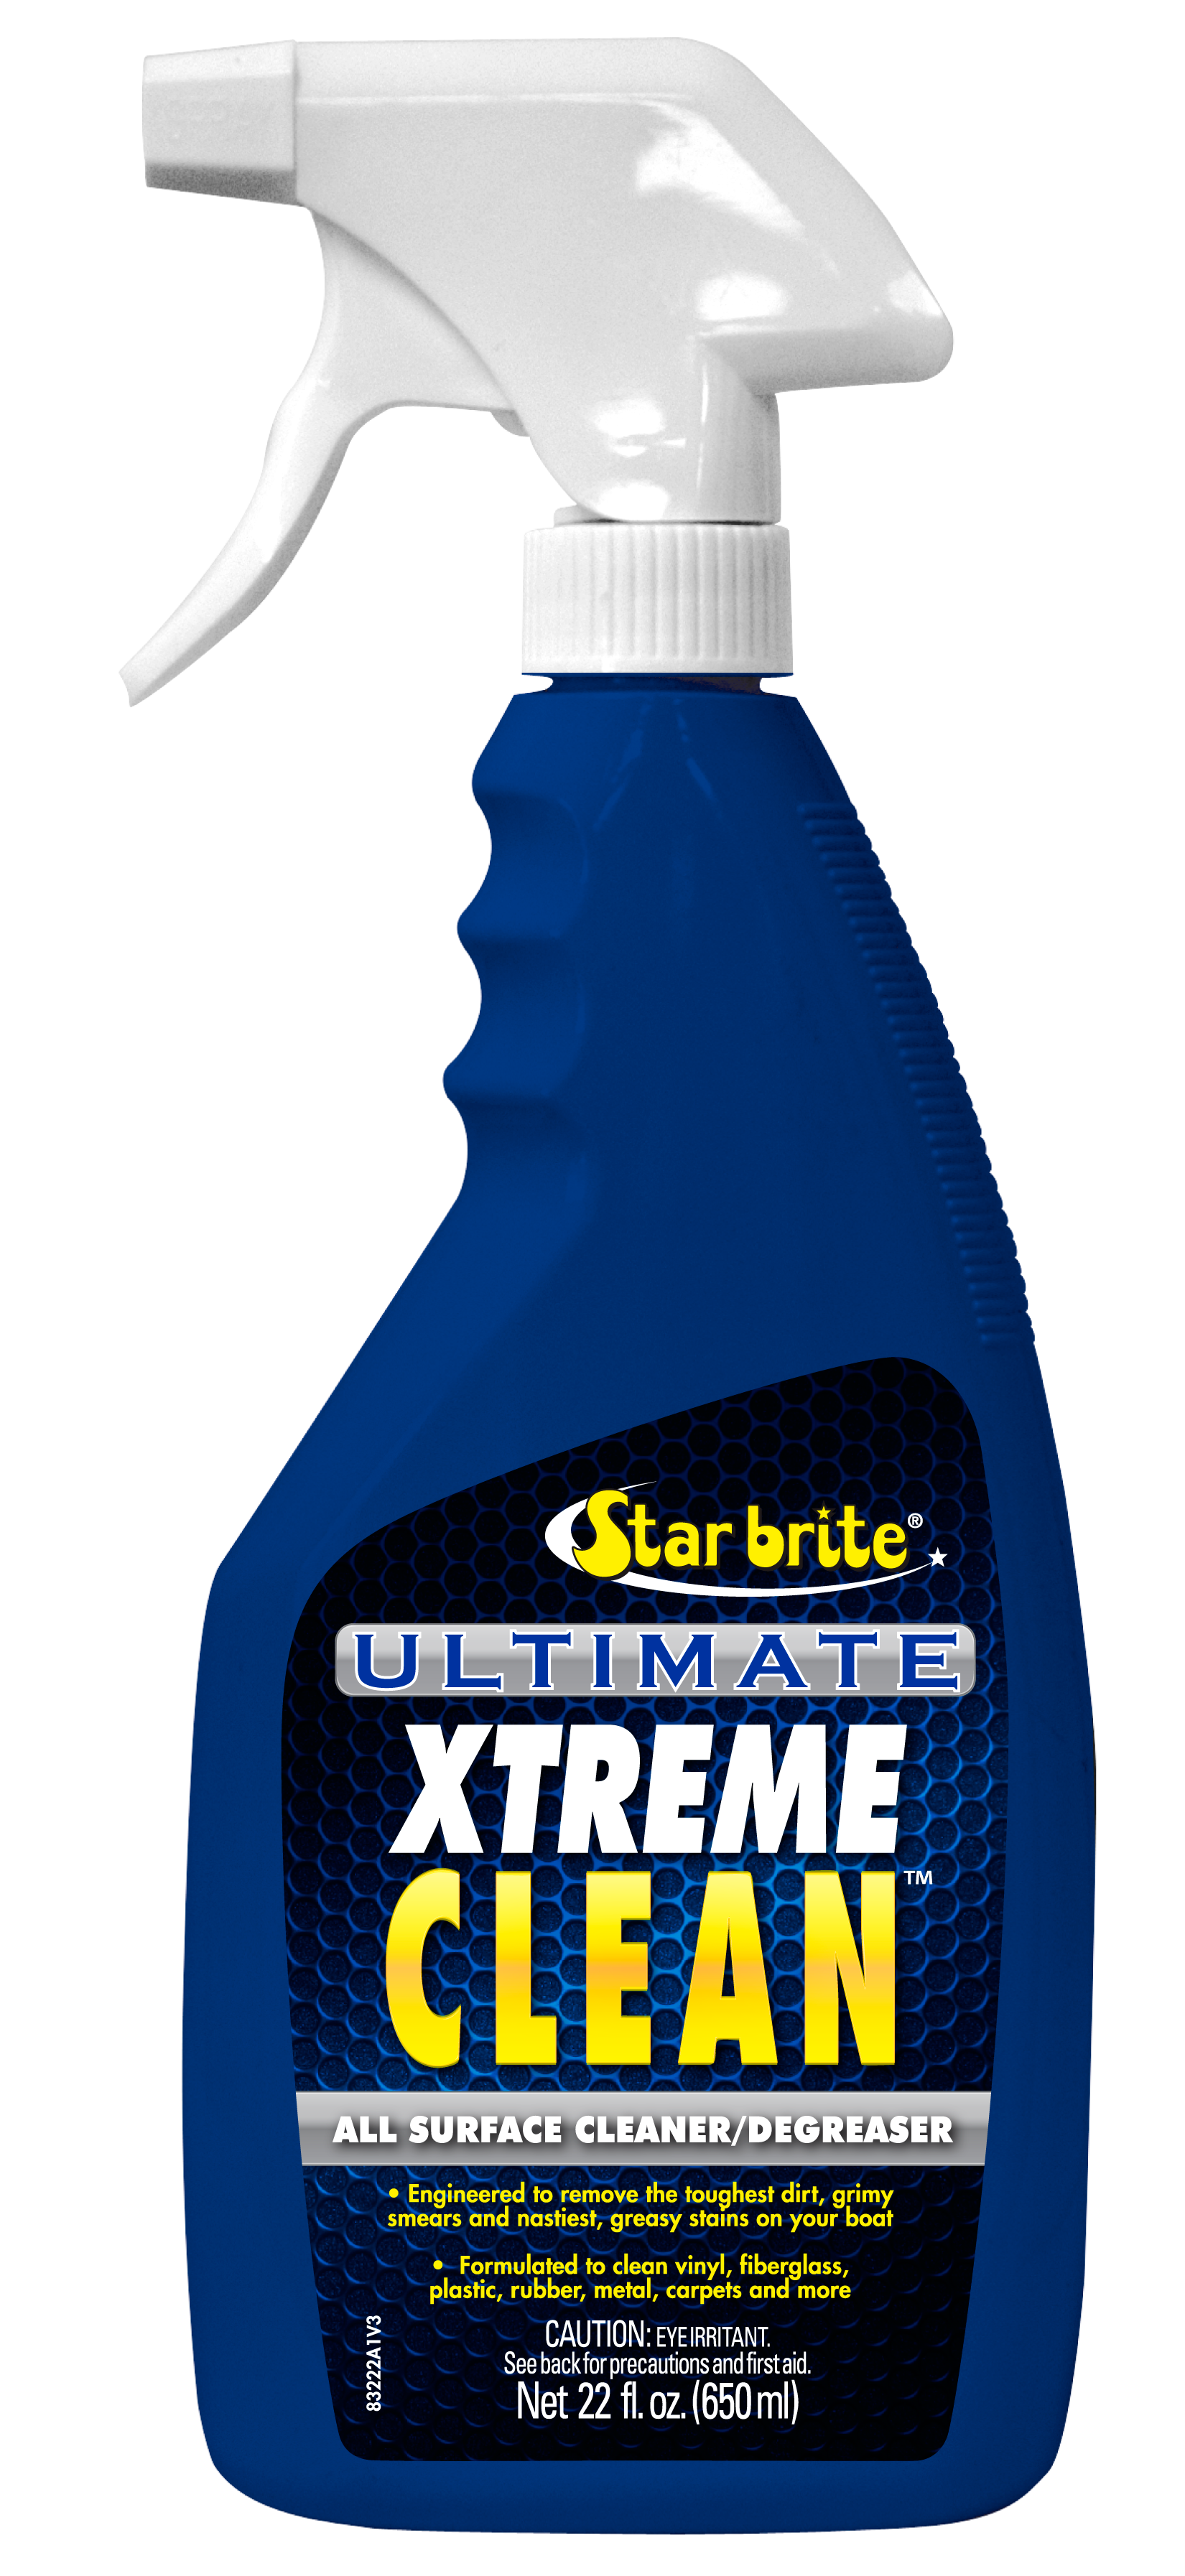 <p>Star Brite</p> <p>Ultimate Xtreme Clean</p> <p>Need something to clean every surface on your boat? Star brite Xtreme Clean does just that- it attacks dirt and grease on vinyl, fiberglass, plastic, rubber, metal, carpets, and more. </p> 